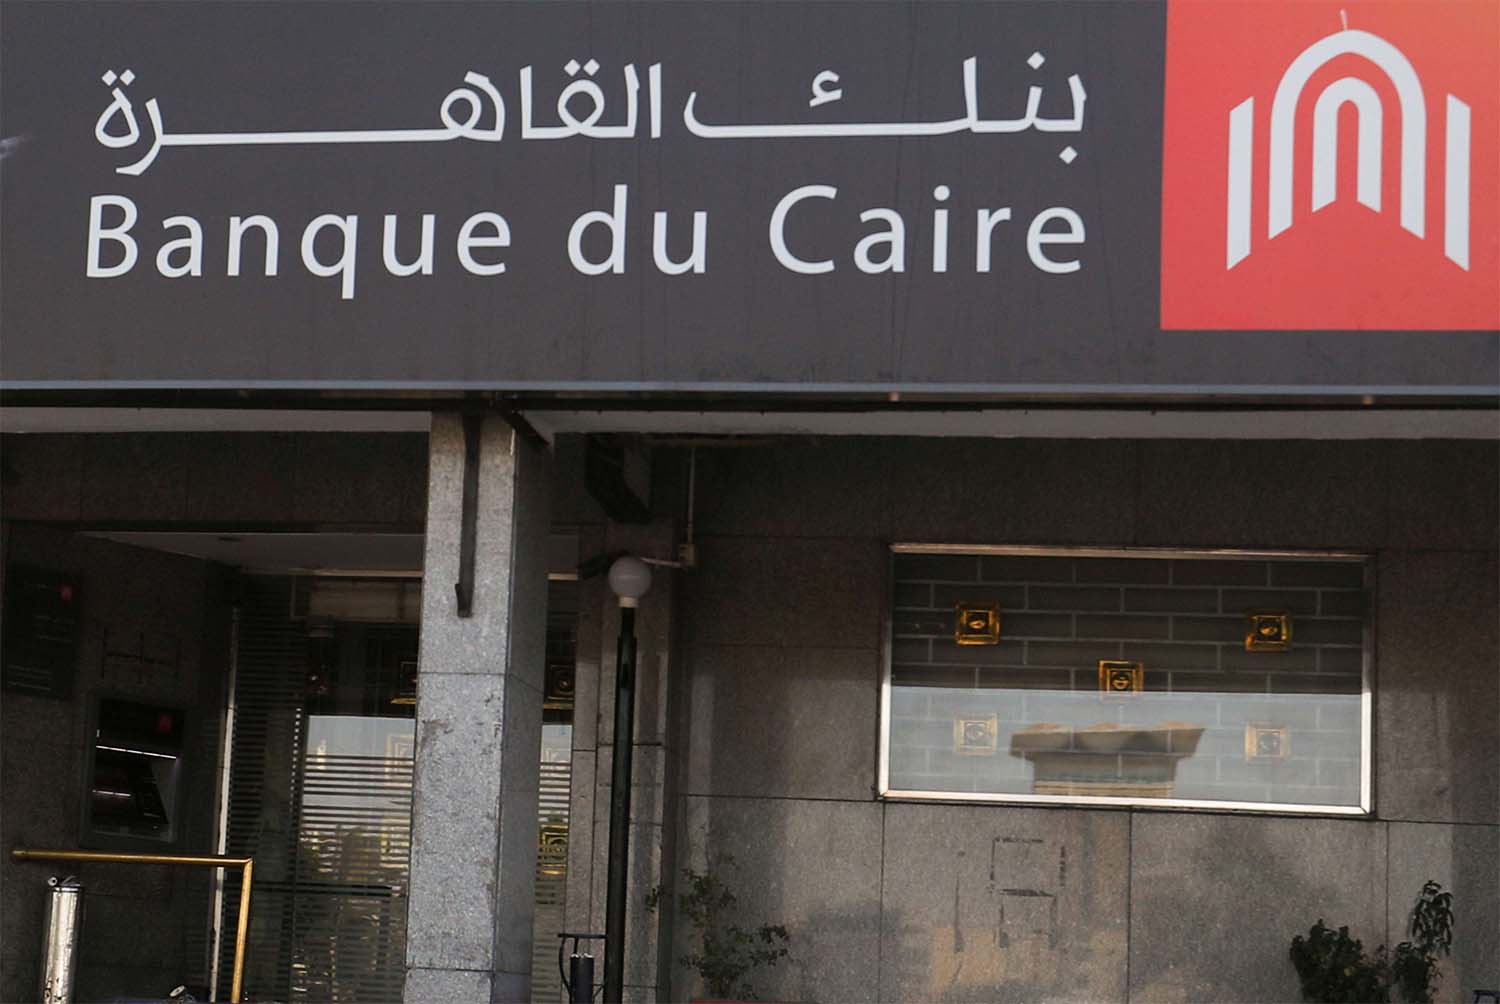 Banque du Caire is one of four listed companies that has been instructed to sell shares by the end of the year